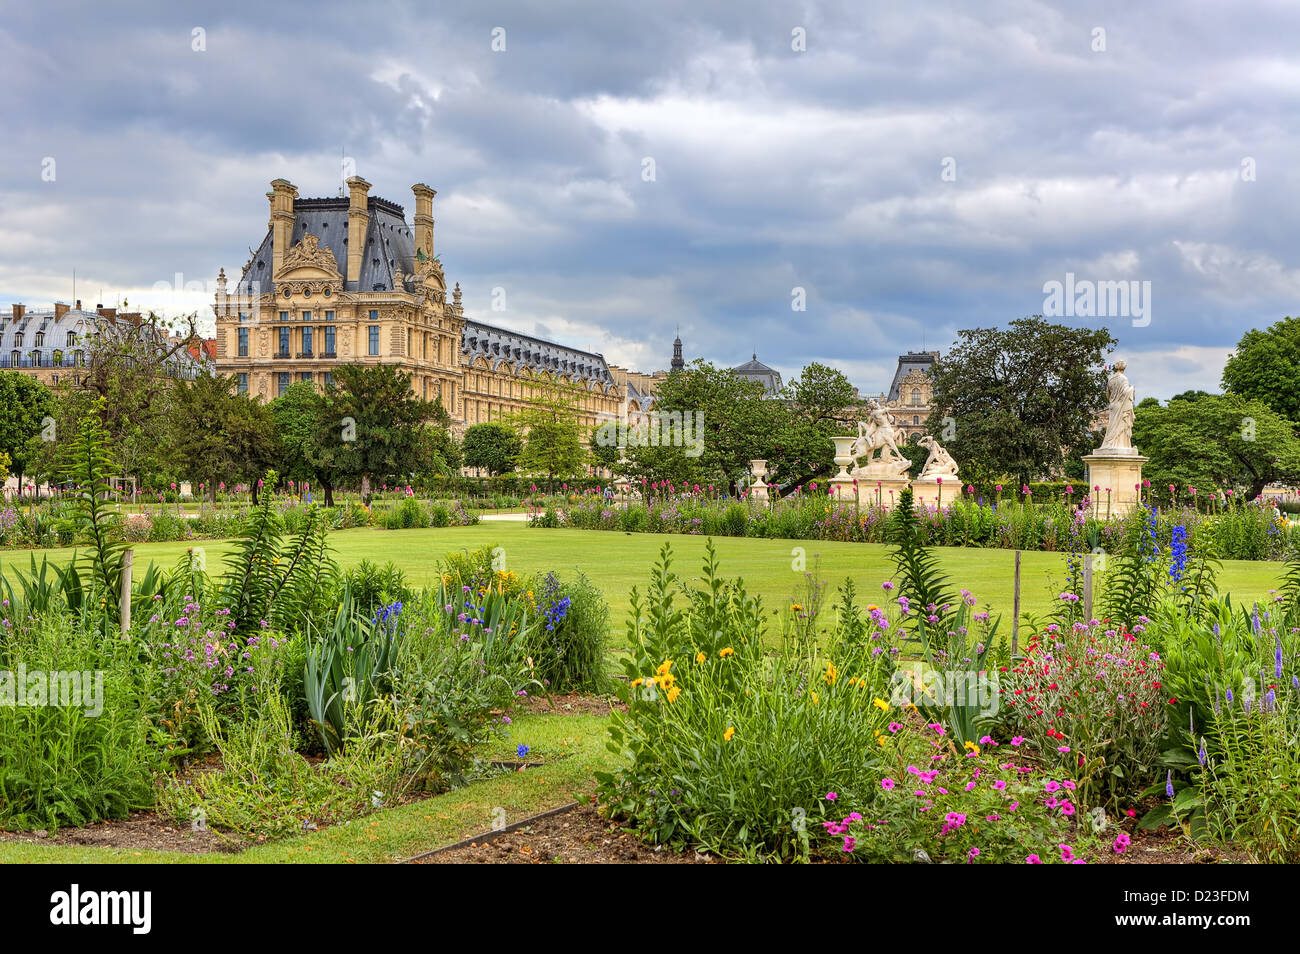 Green lawn, statues and flowers at famous Tuileries Garden and Louvre museum on background under cloudy sky in Paris, France. Stock Photo